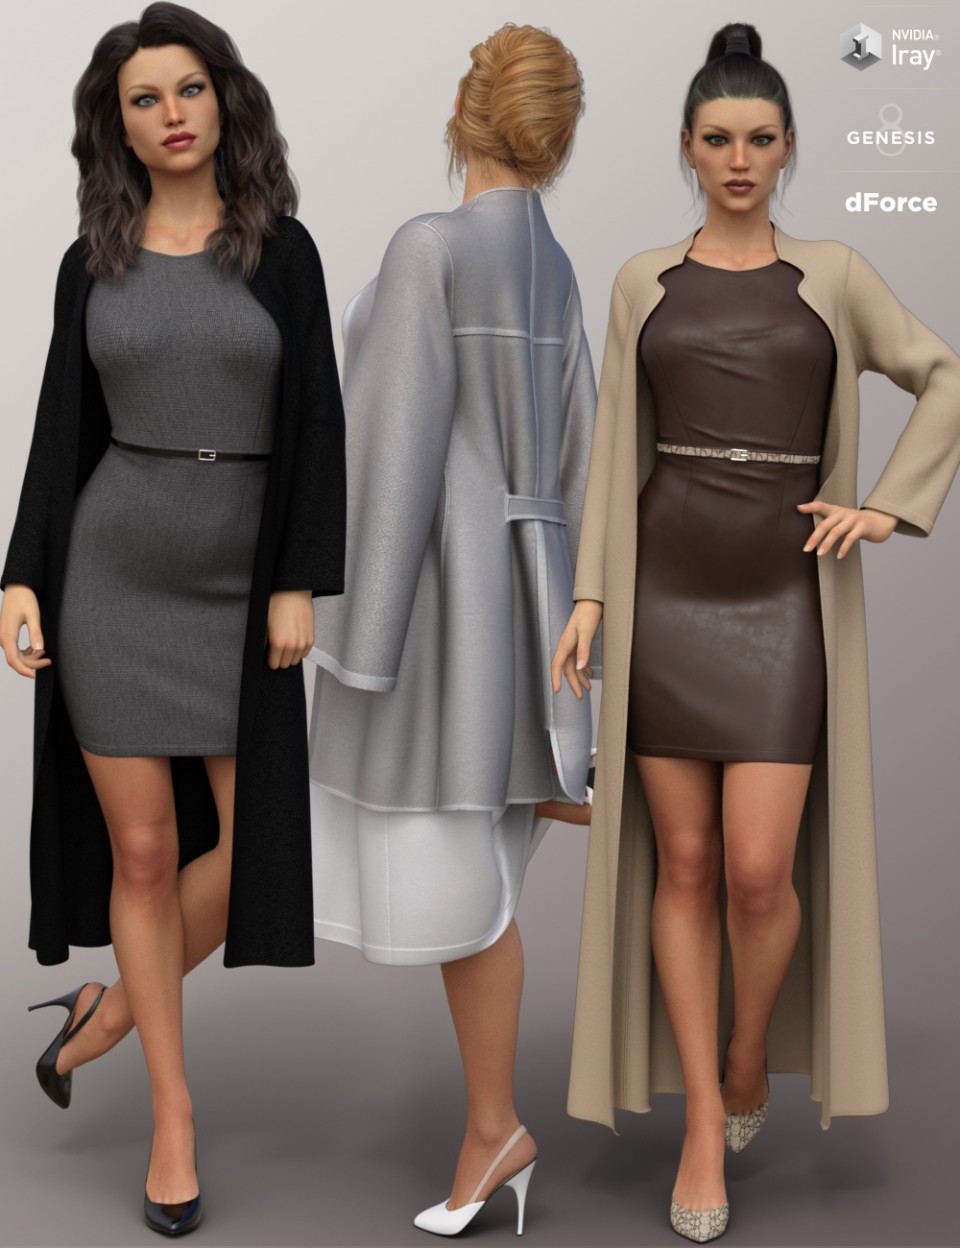 dForce Fashion Sophisticate Outfit for Genesis 8 Female(s)_DAZ3D下载站